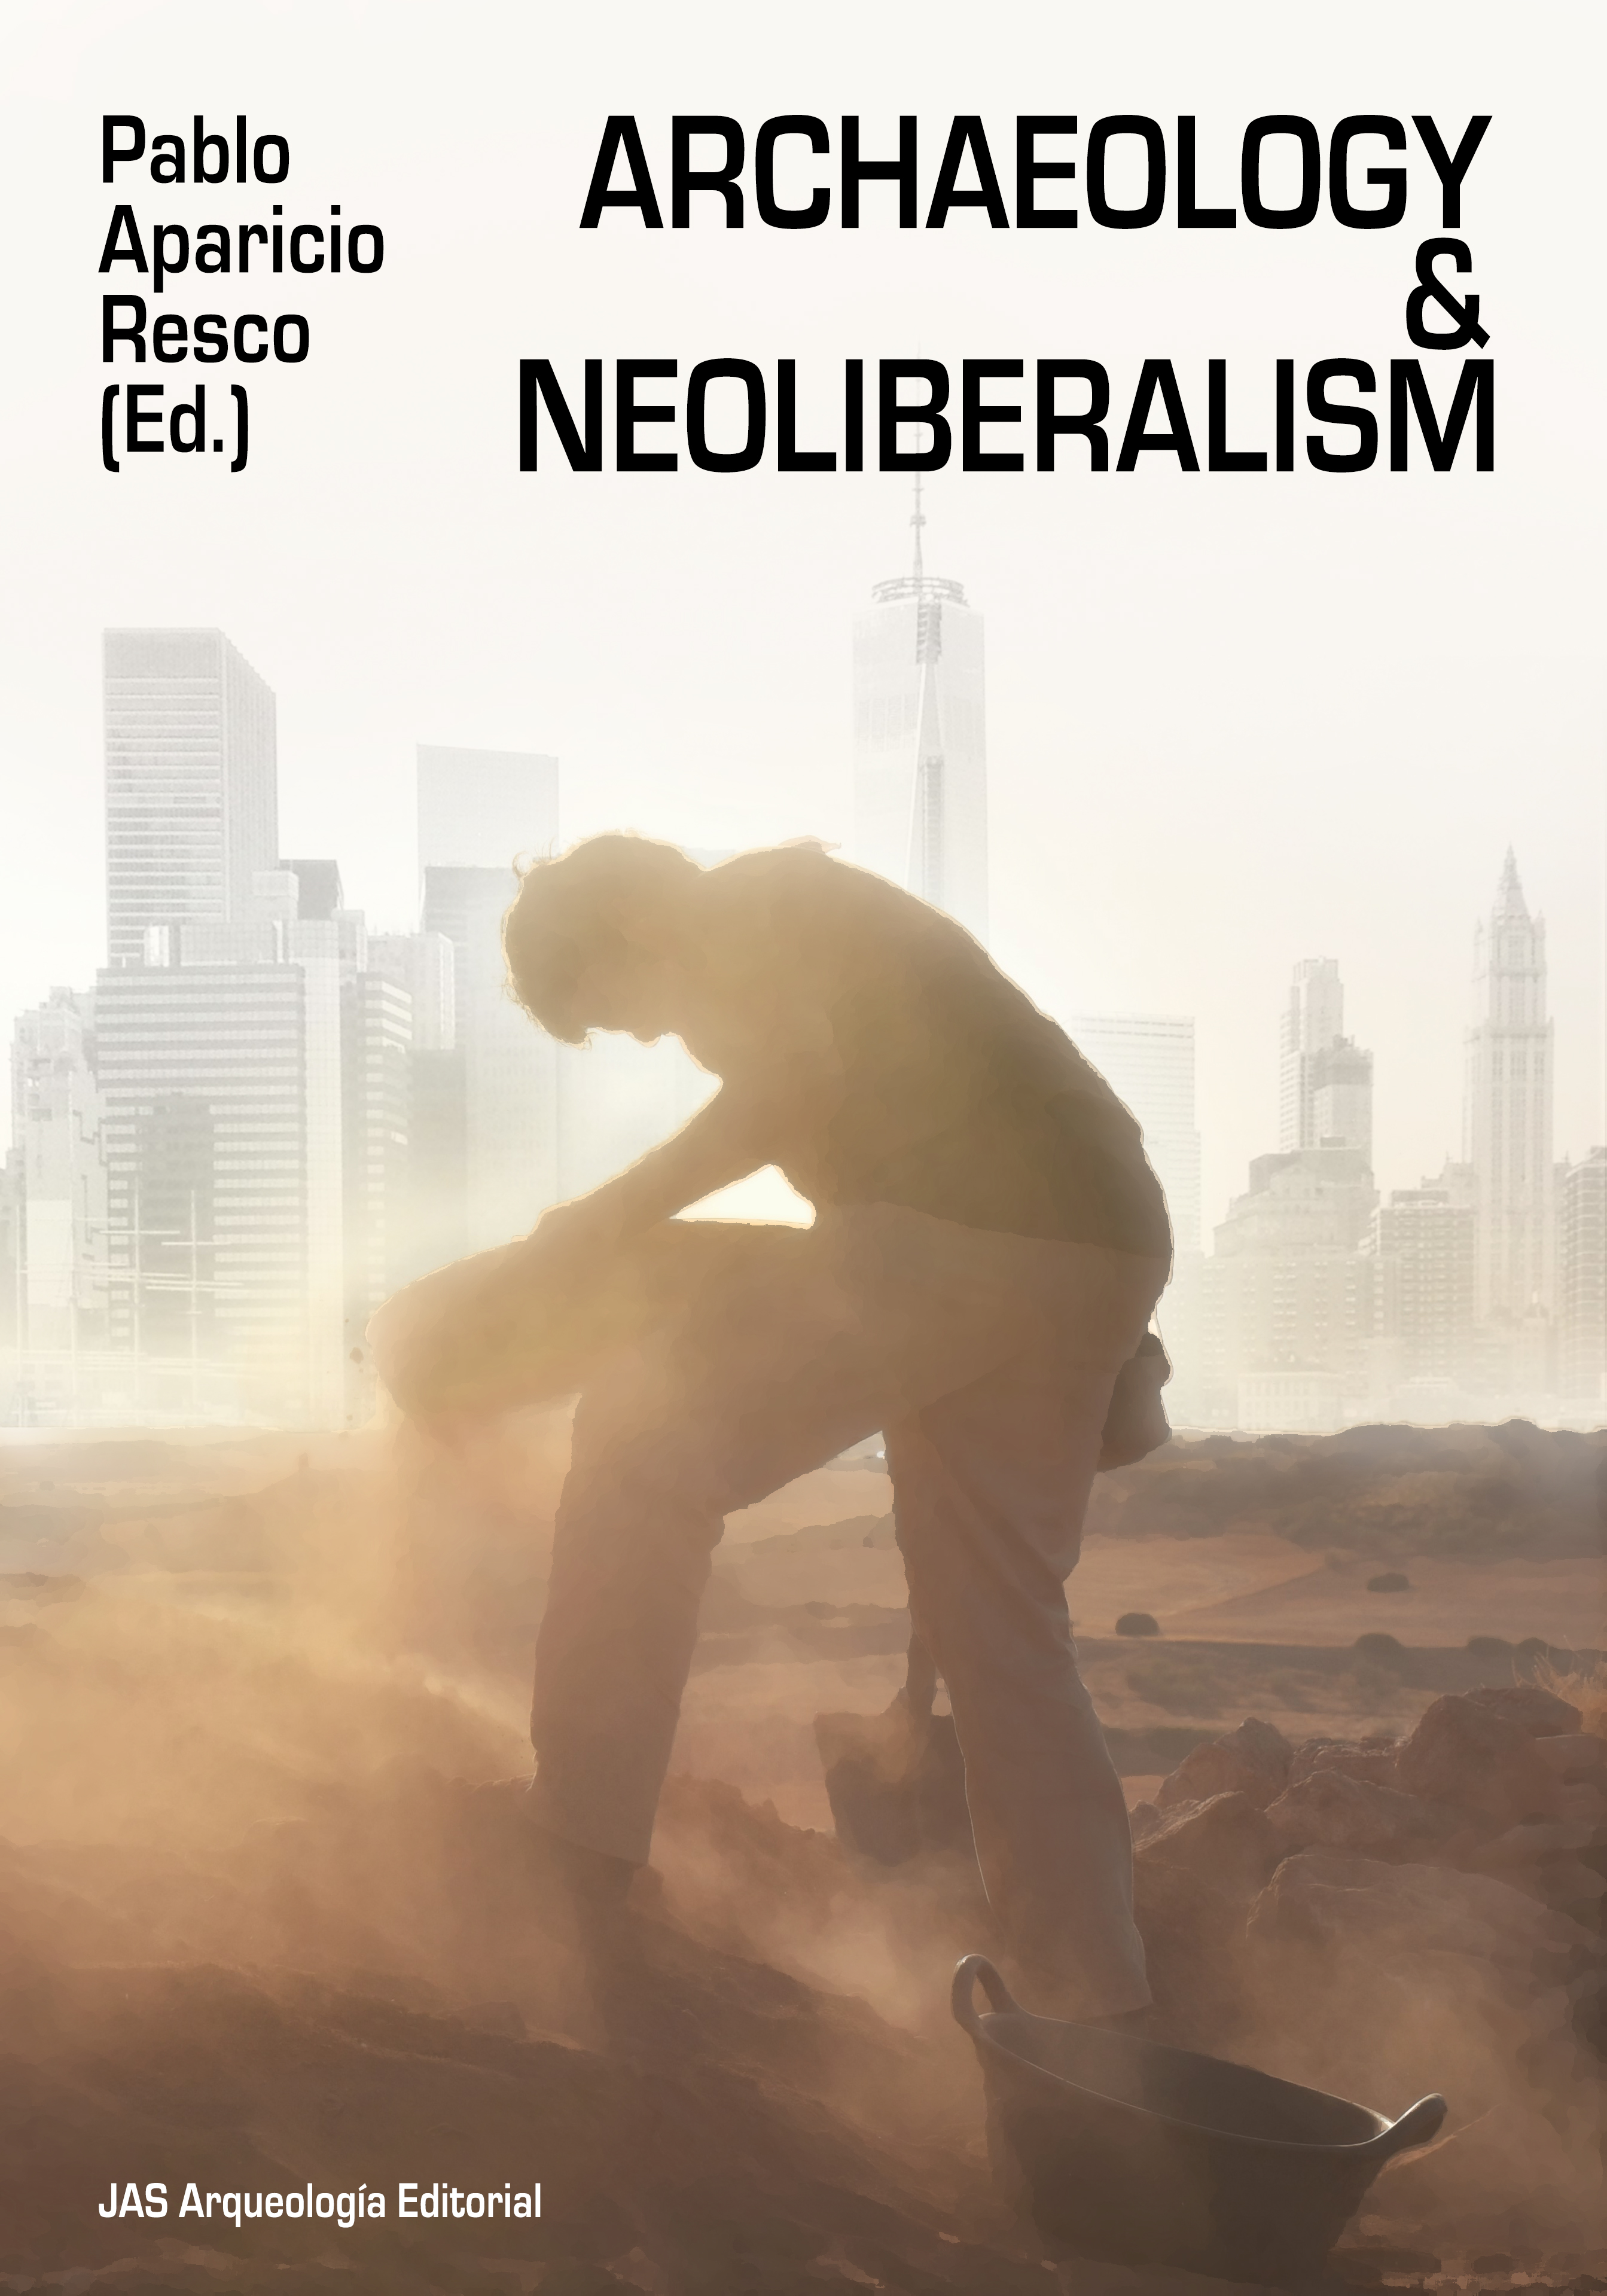 Archaeology and neoliberalism